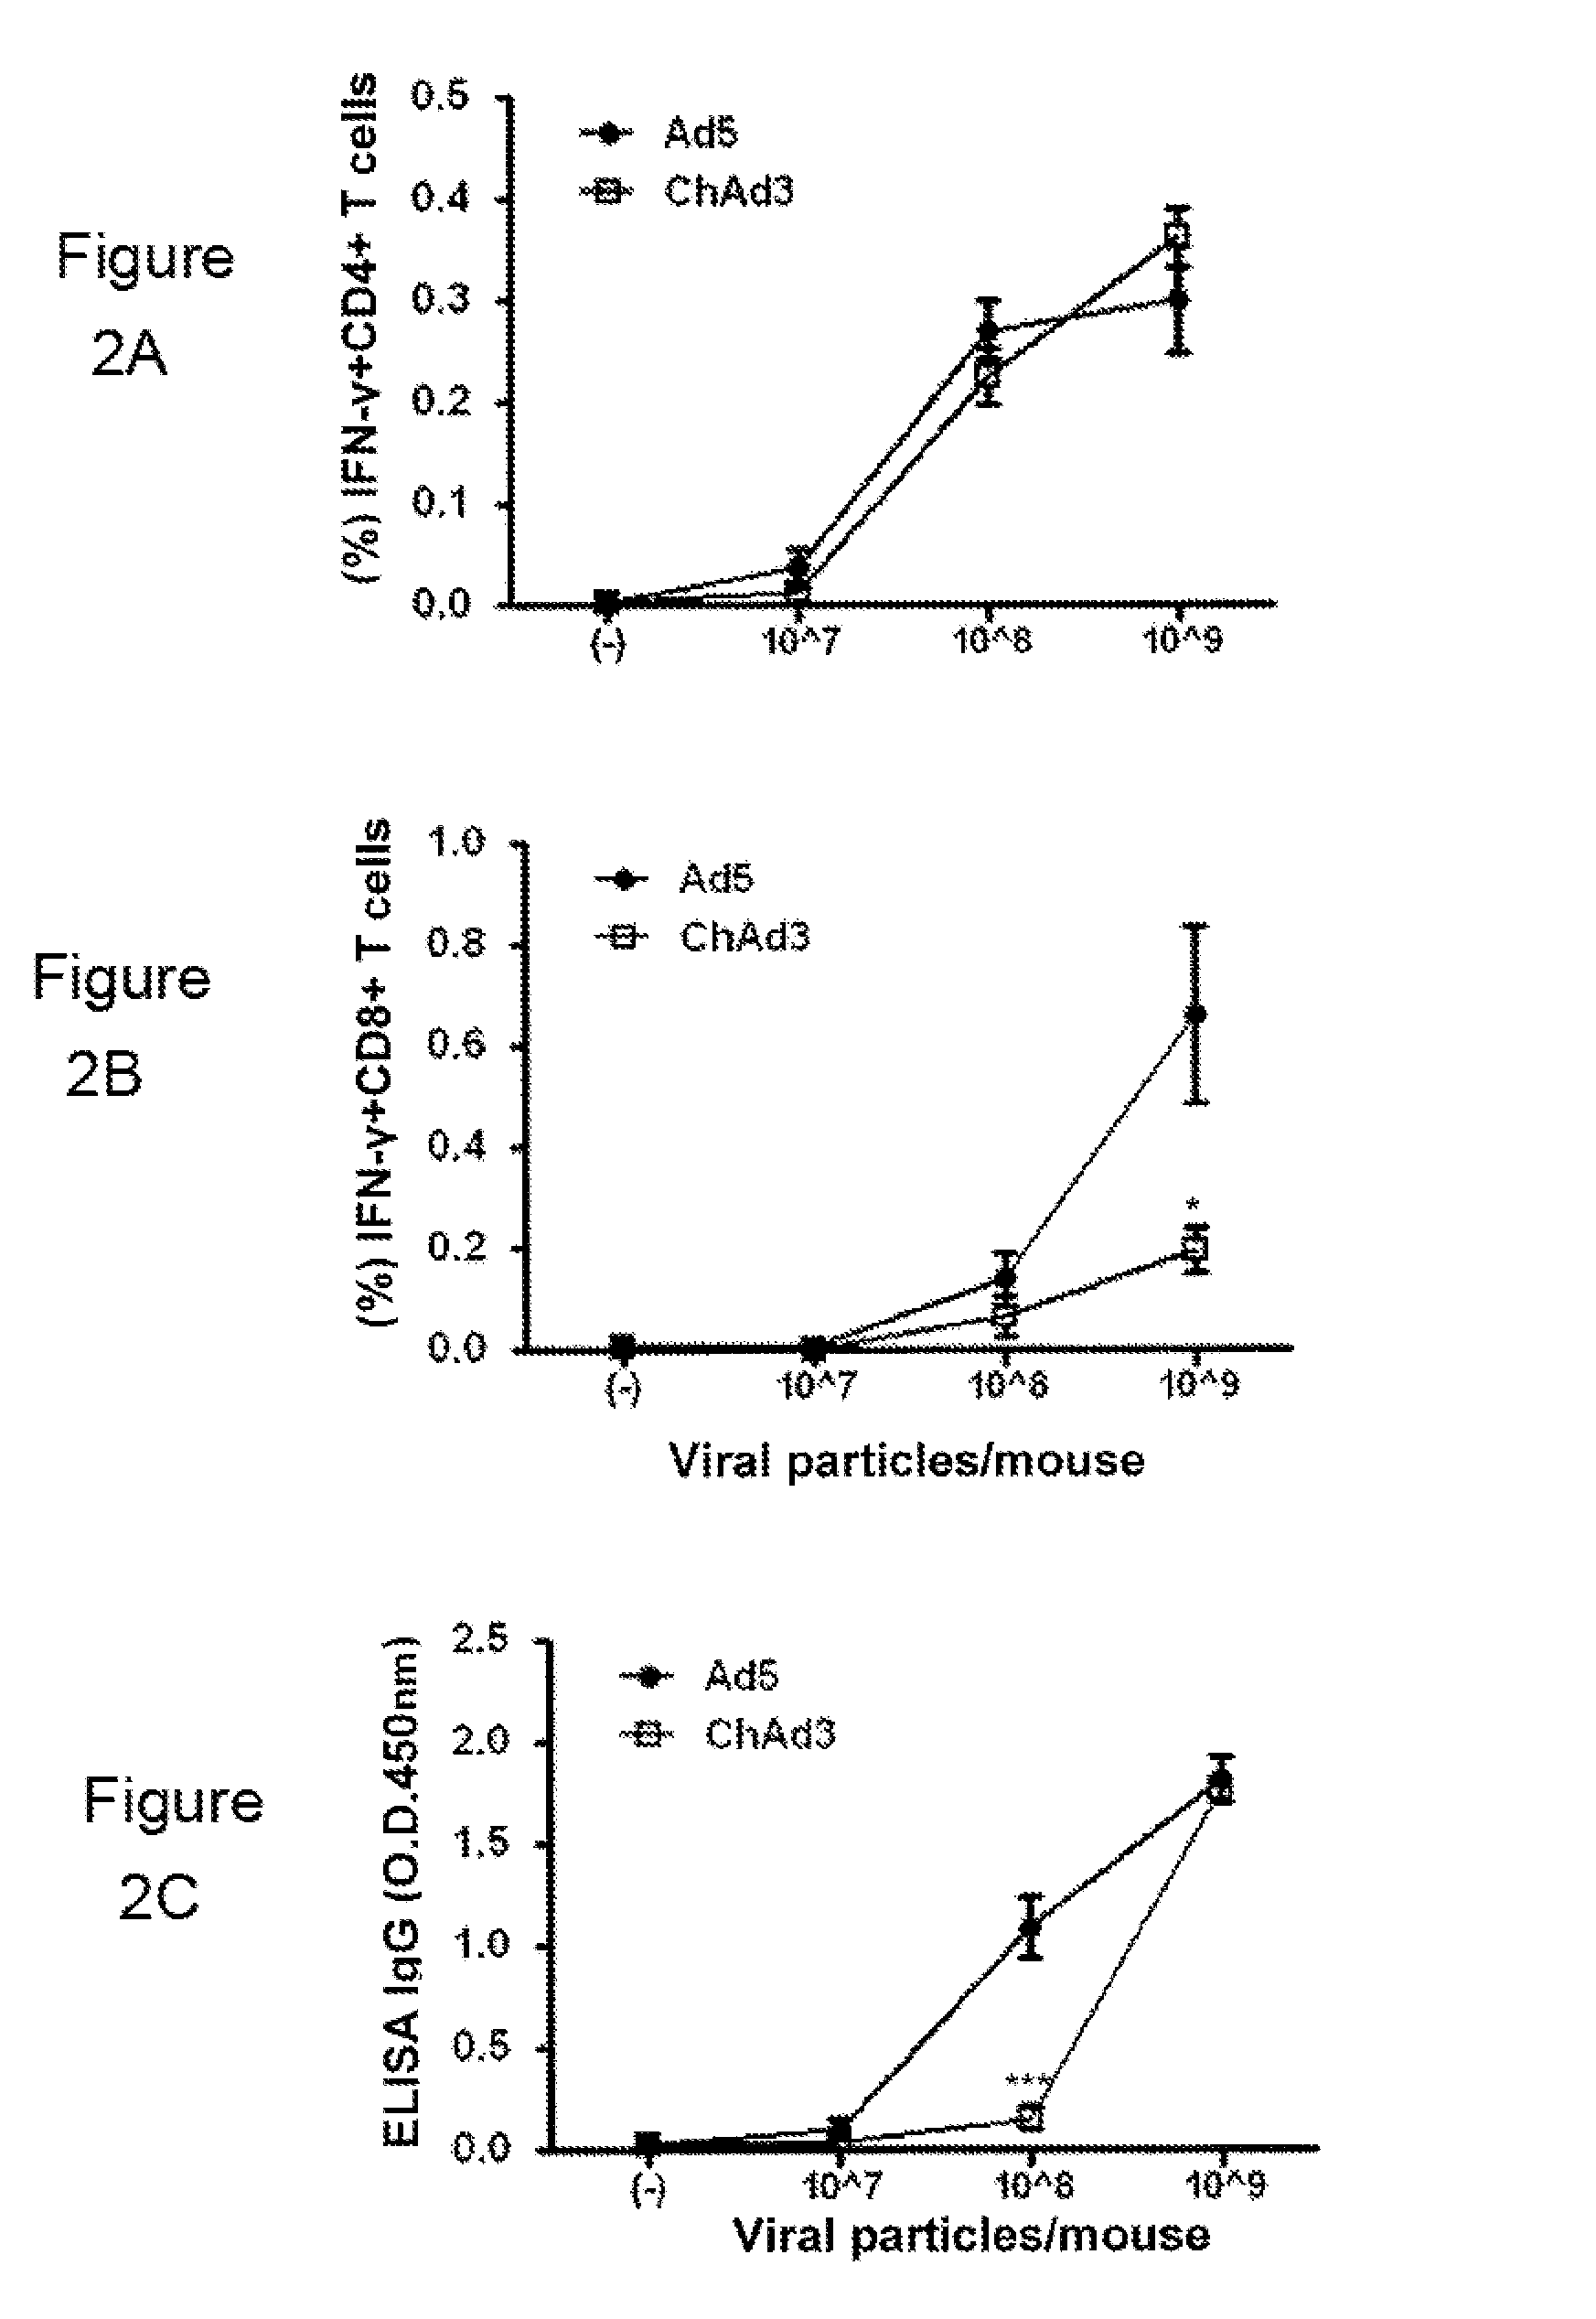 Methods for the induction of ebola virus-specific immune responses comprising administering a replication-defective chimpanzee adenovirus vector expressing the ebola virus glycoprotein